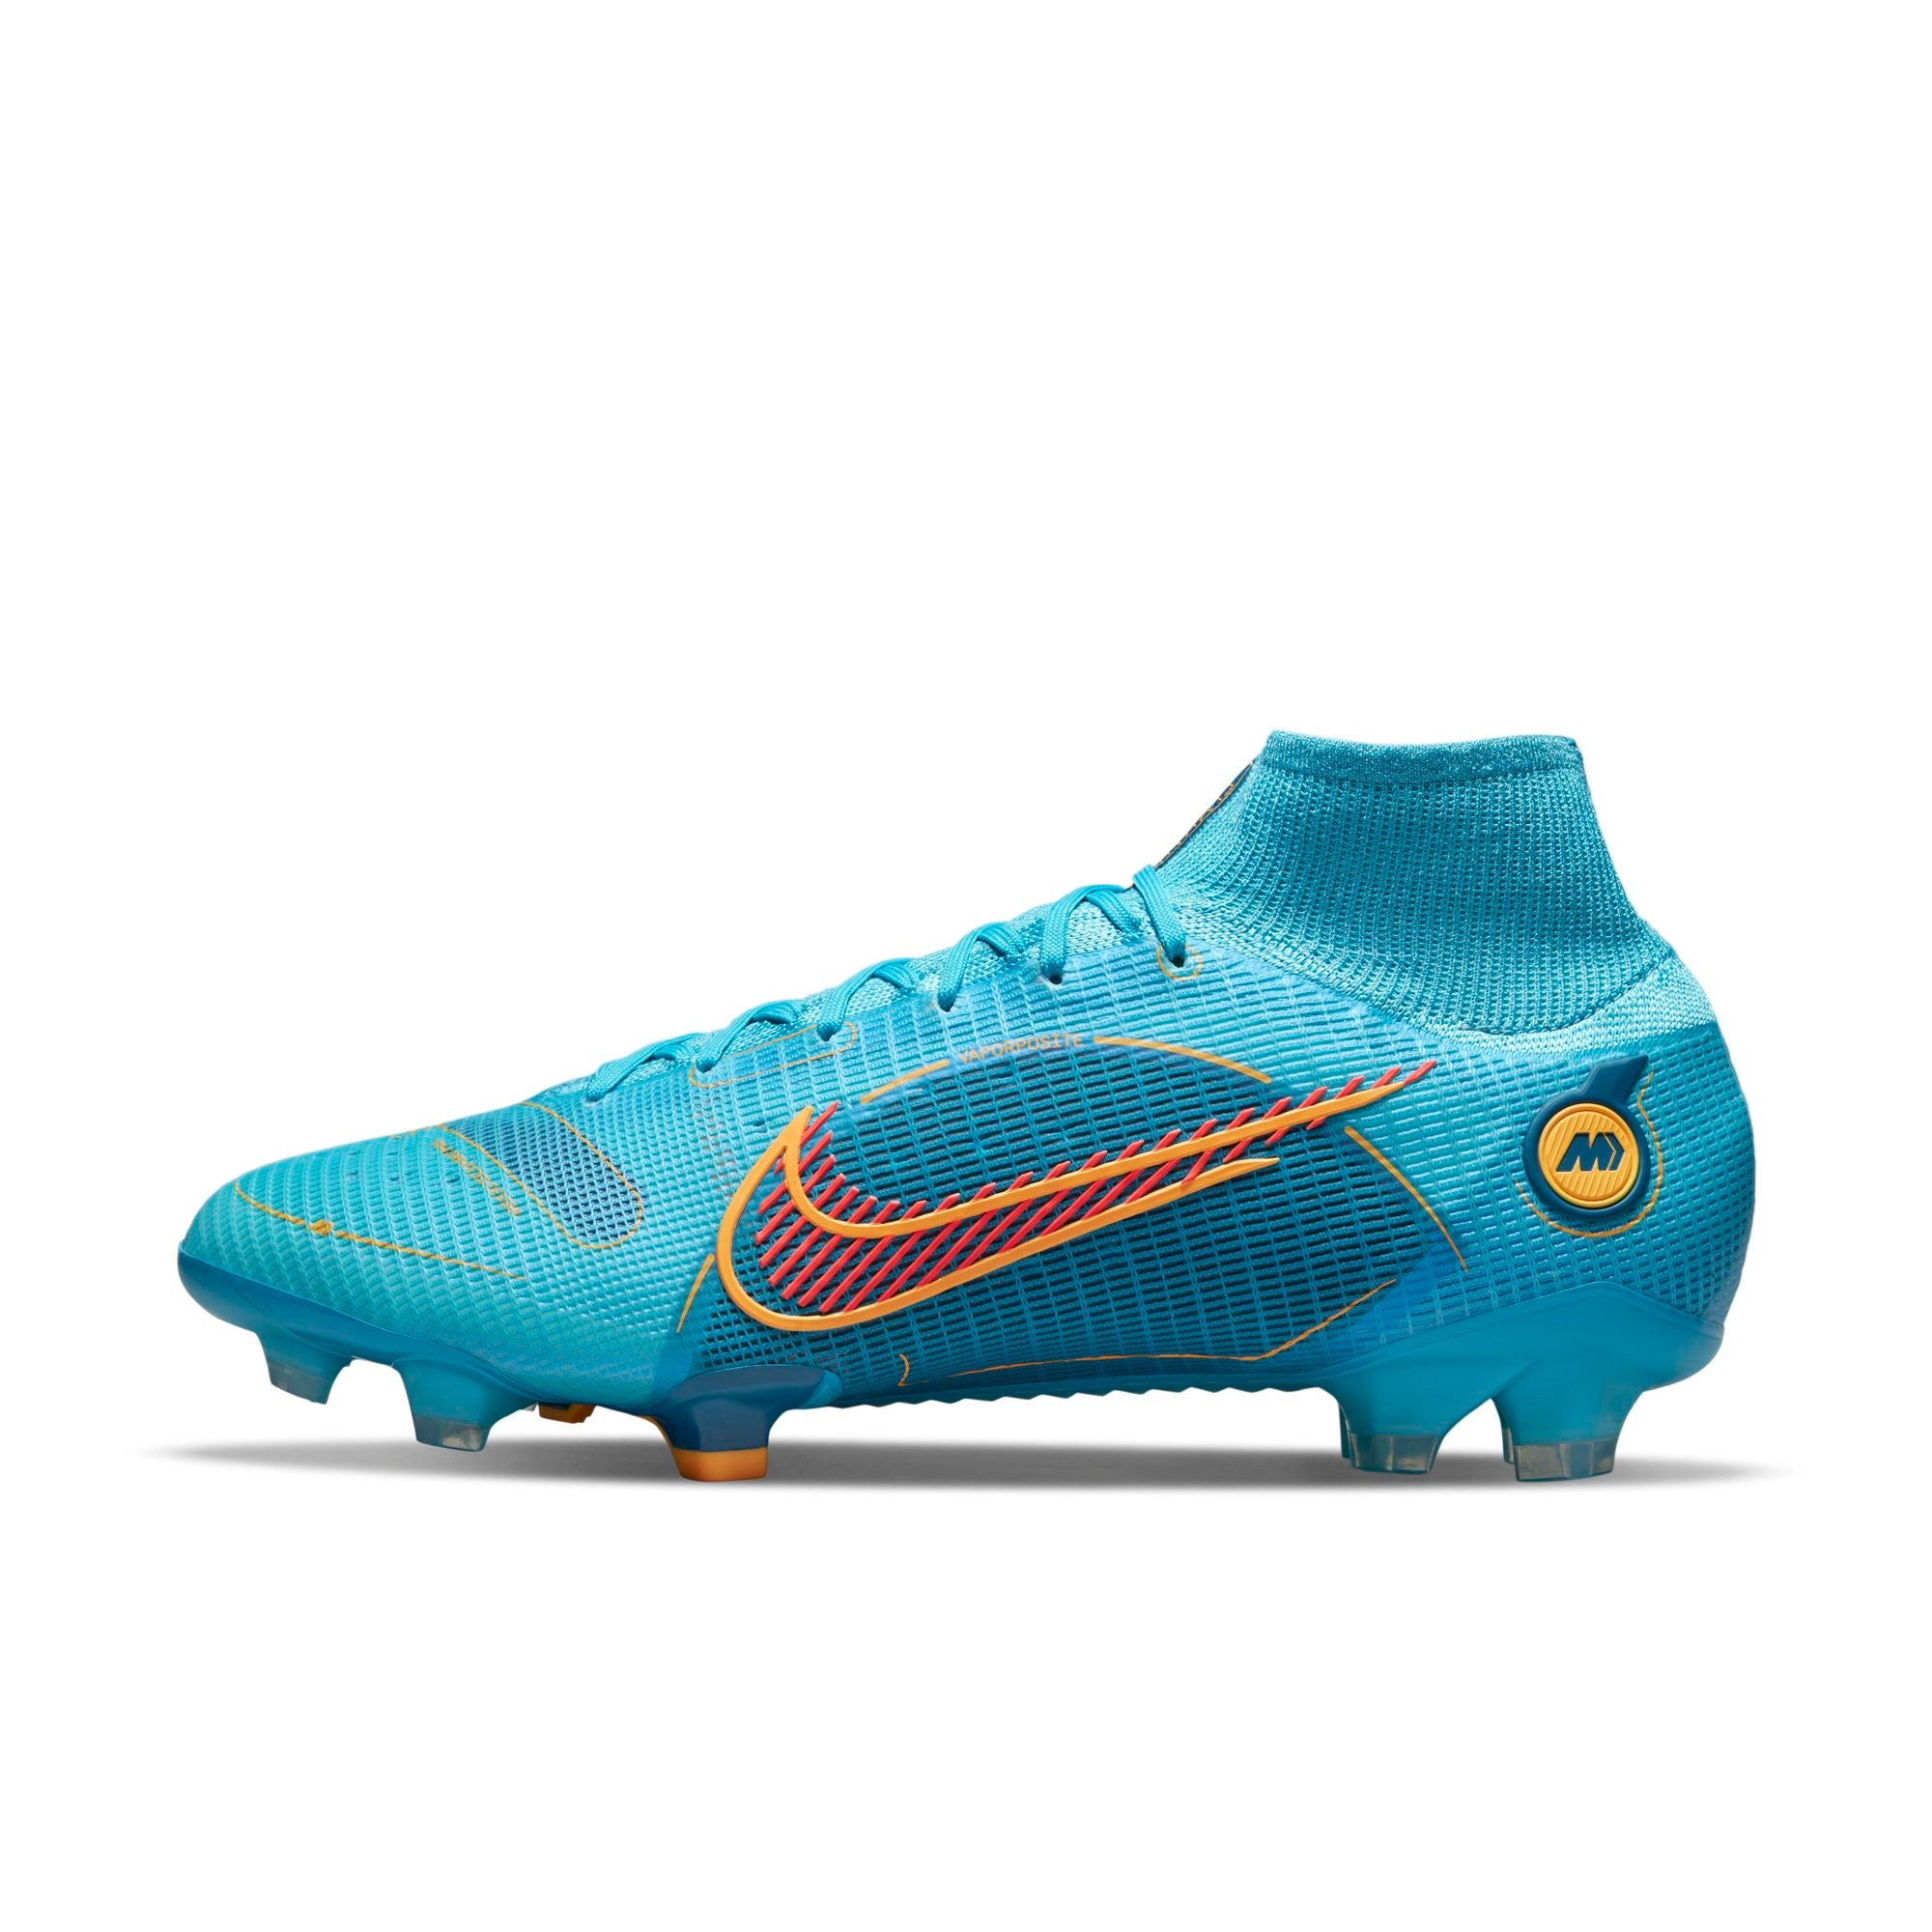 Mercurial Superfly 8 Elite FG Firm-Ground Soccer Cleats